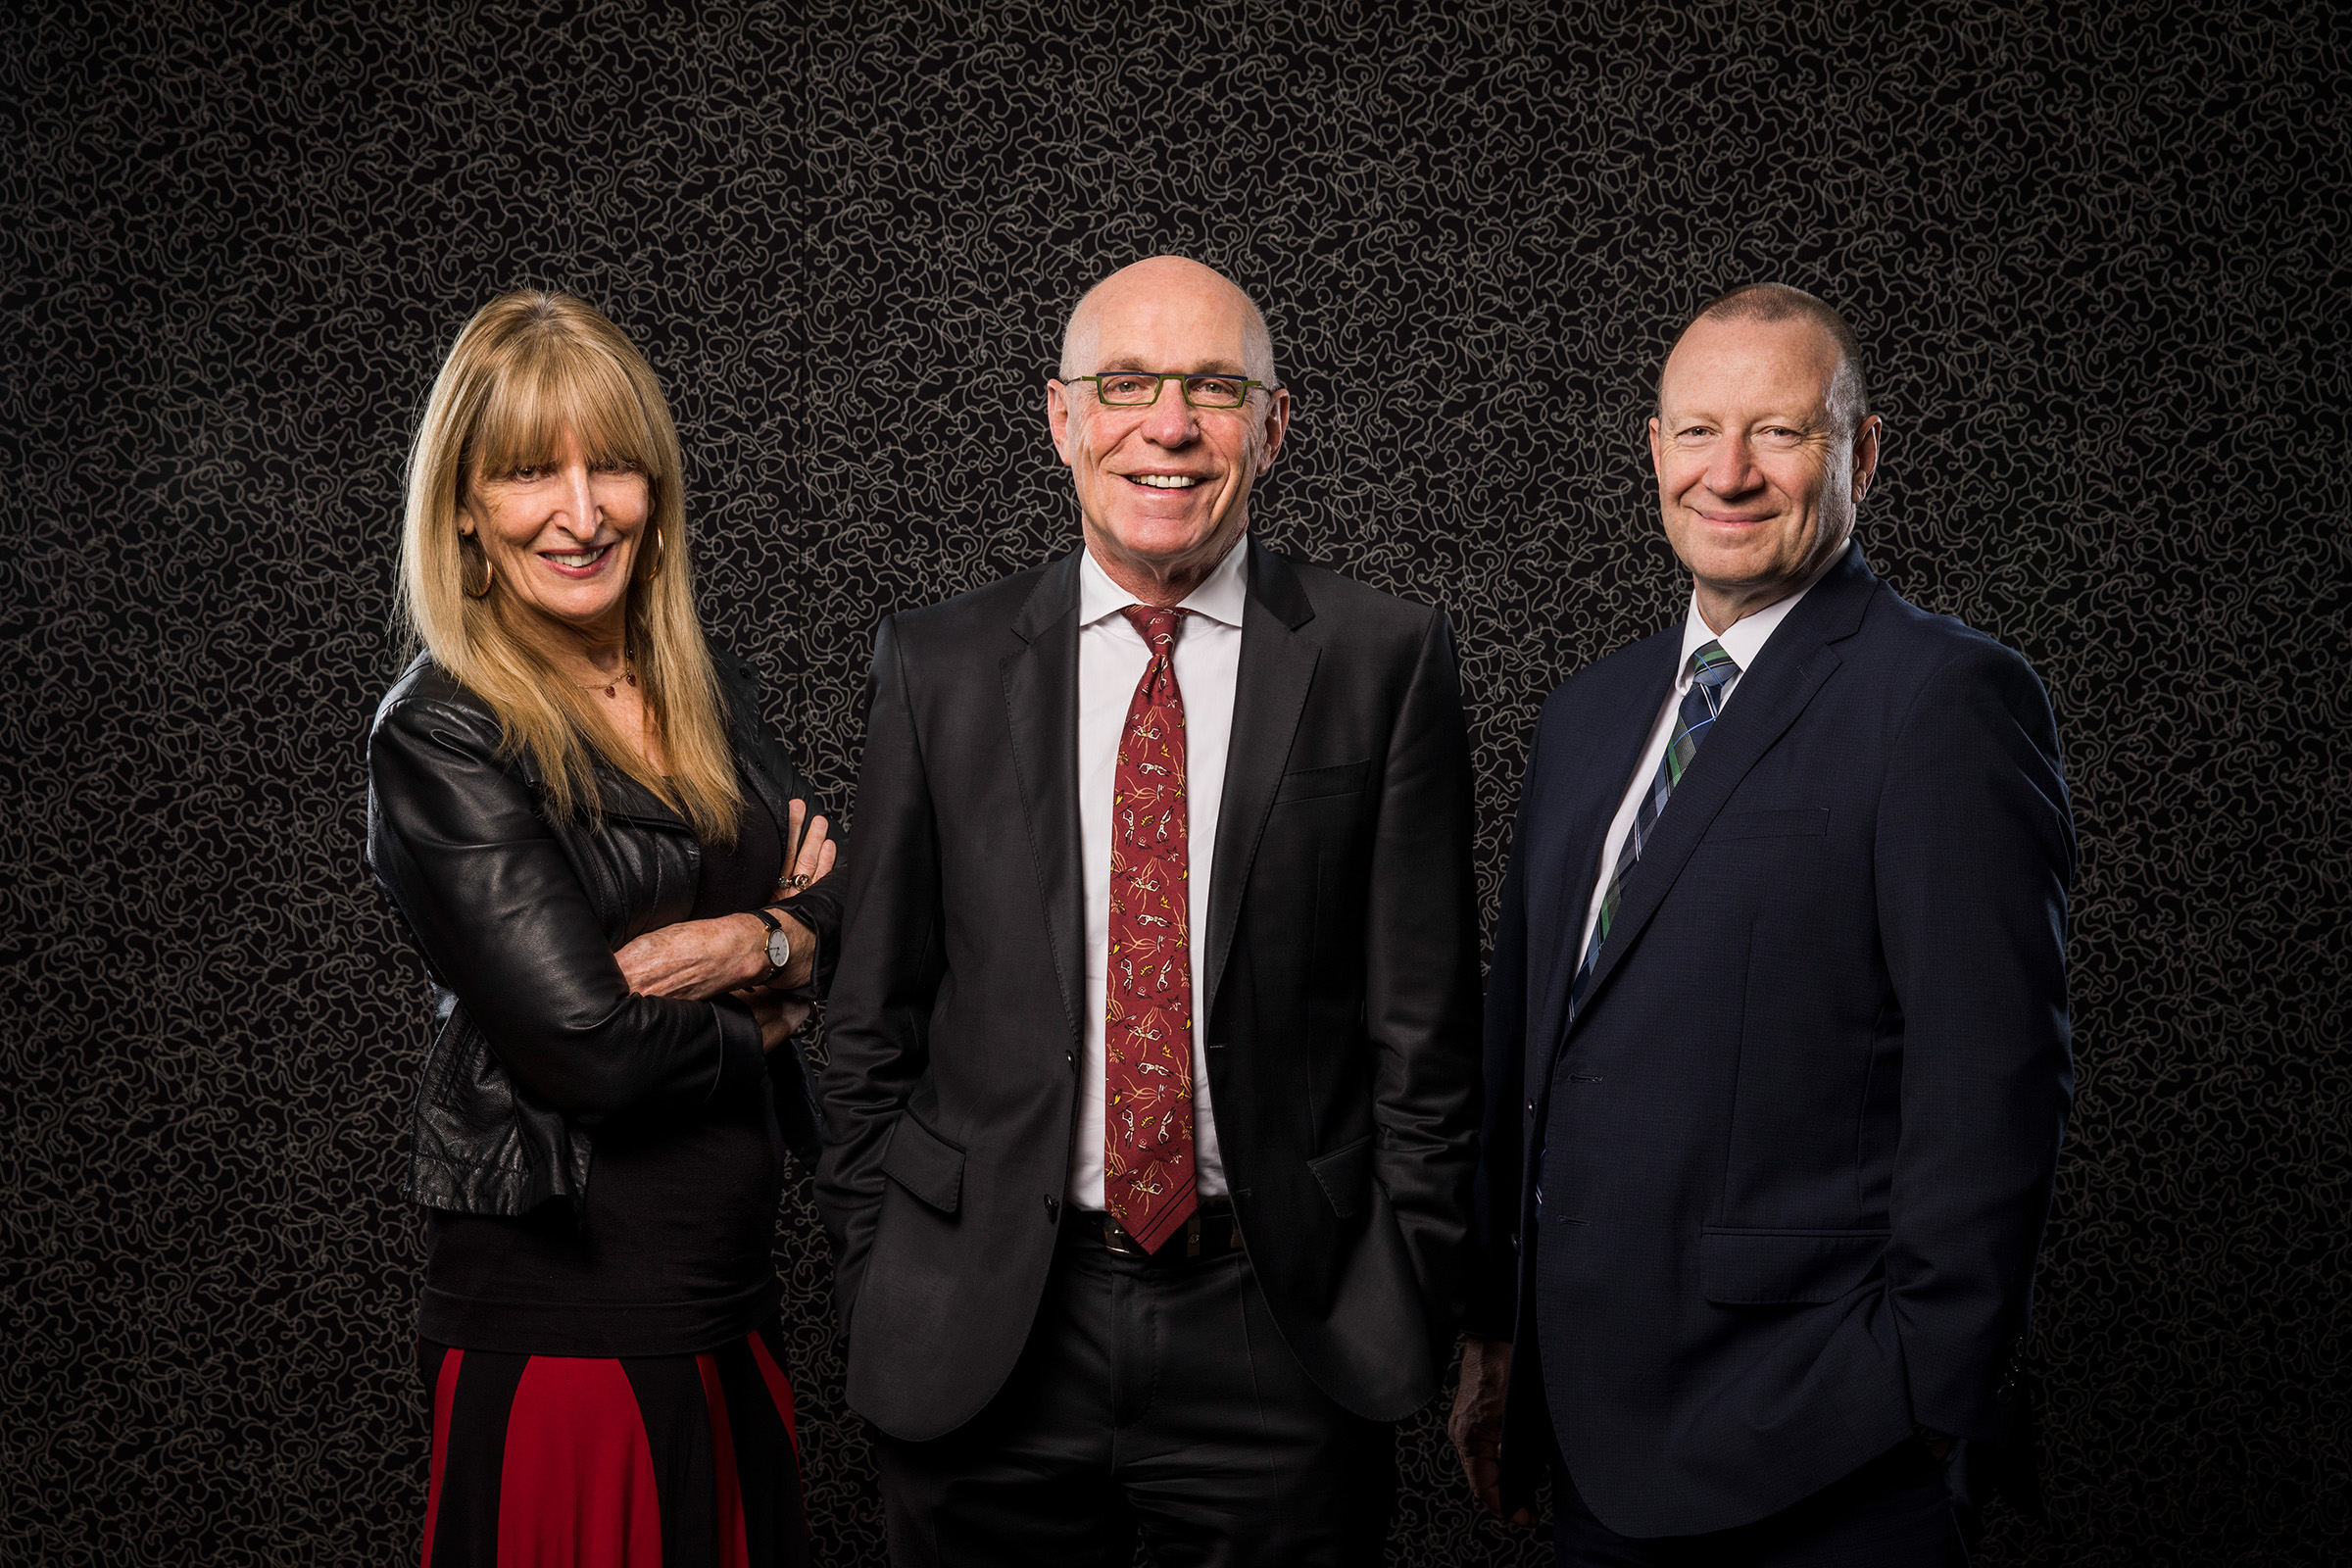 Corporate group photography Sonic Healthcare Colin Goldschmidt one woman 2 men black white textured background